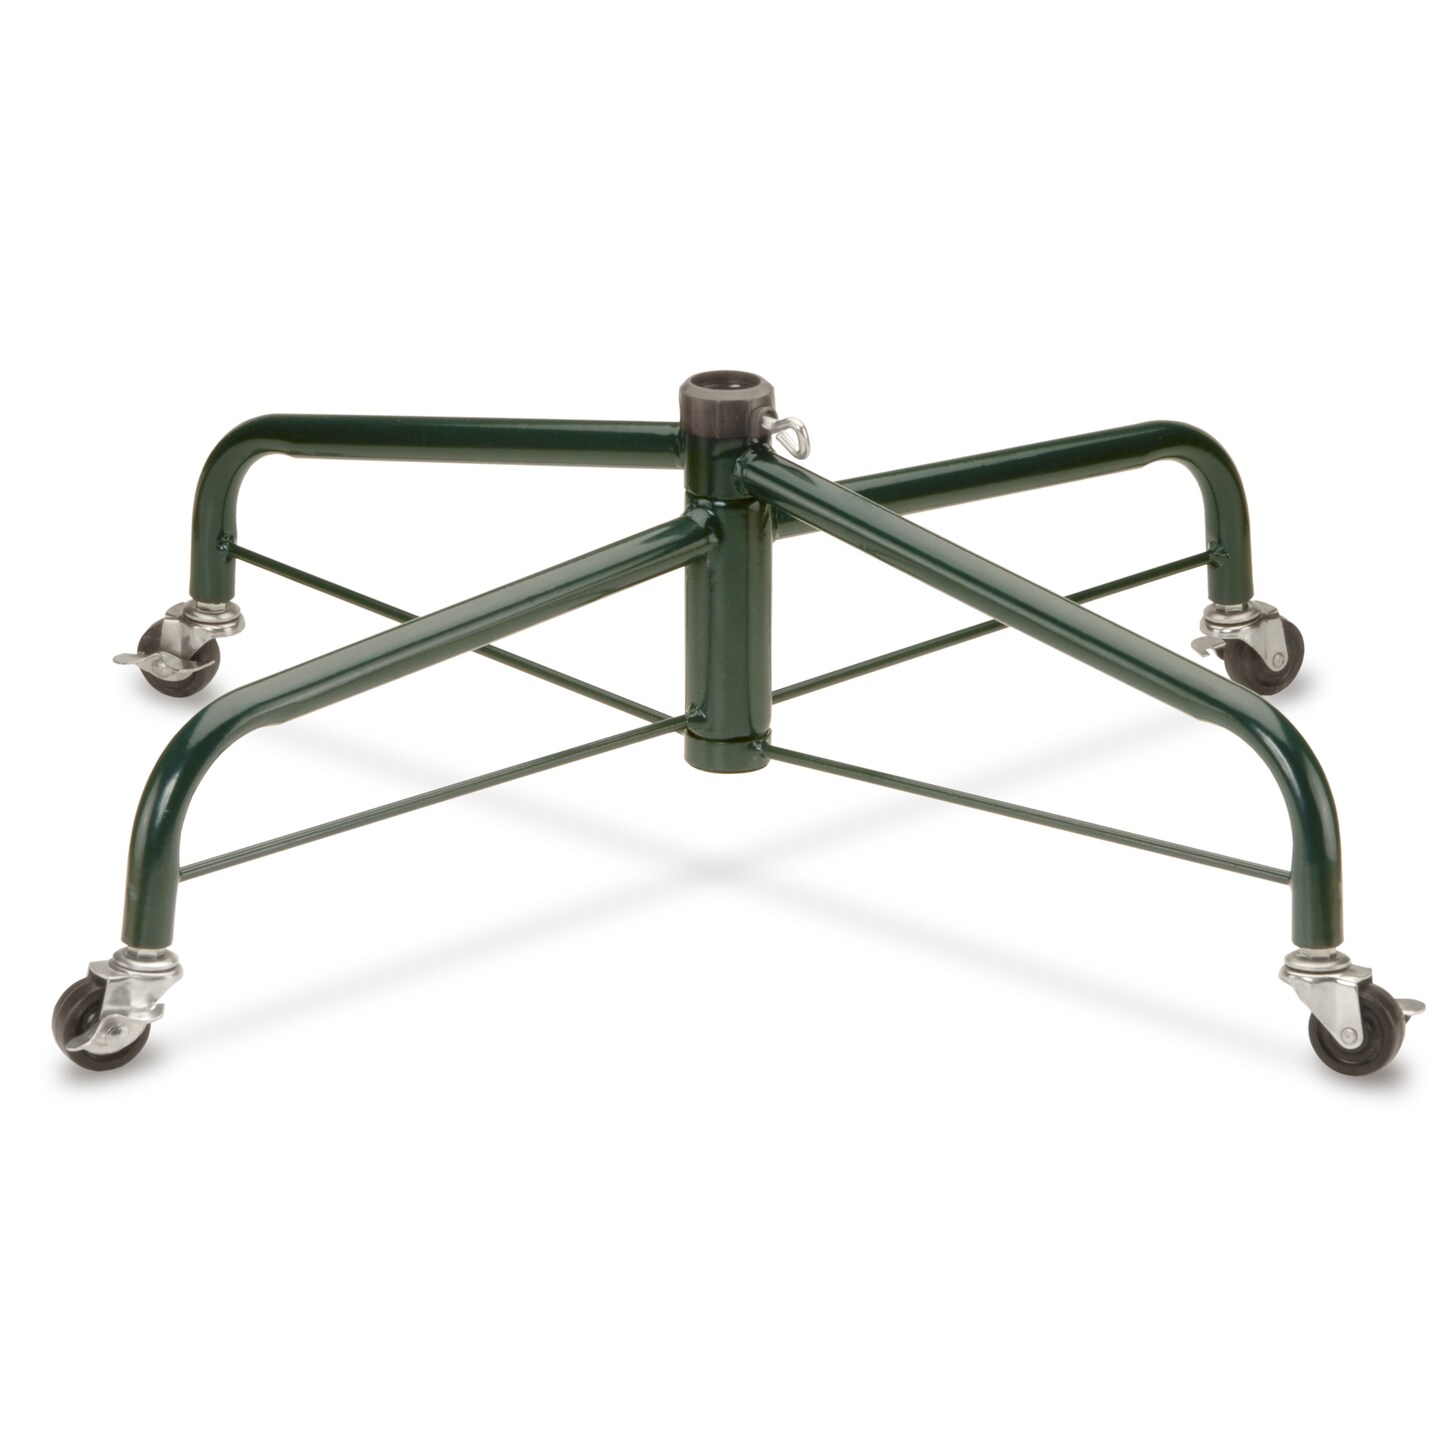 32in. Rolling Tree Stand